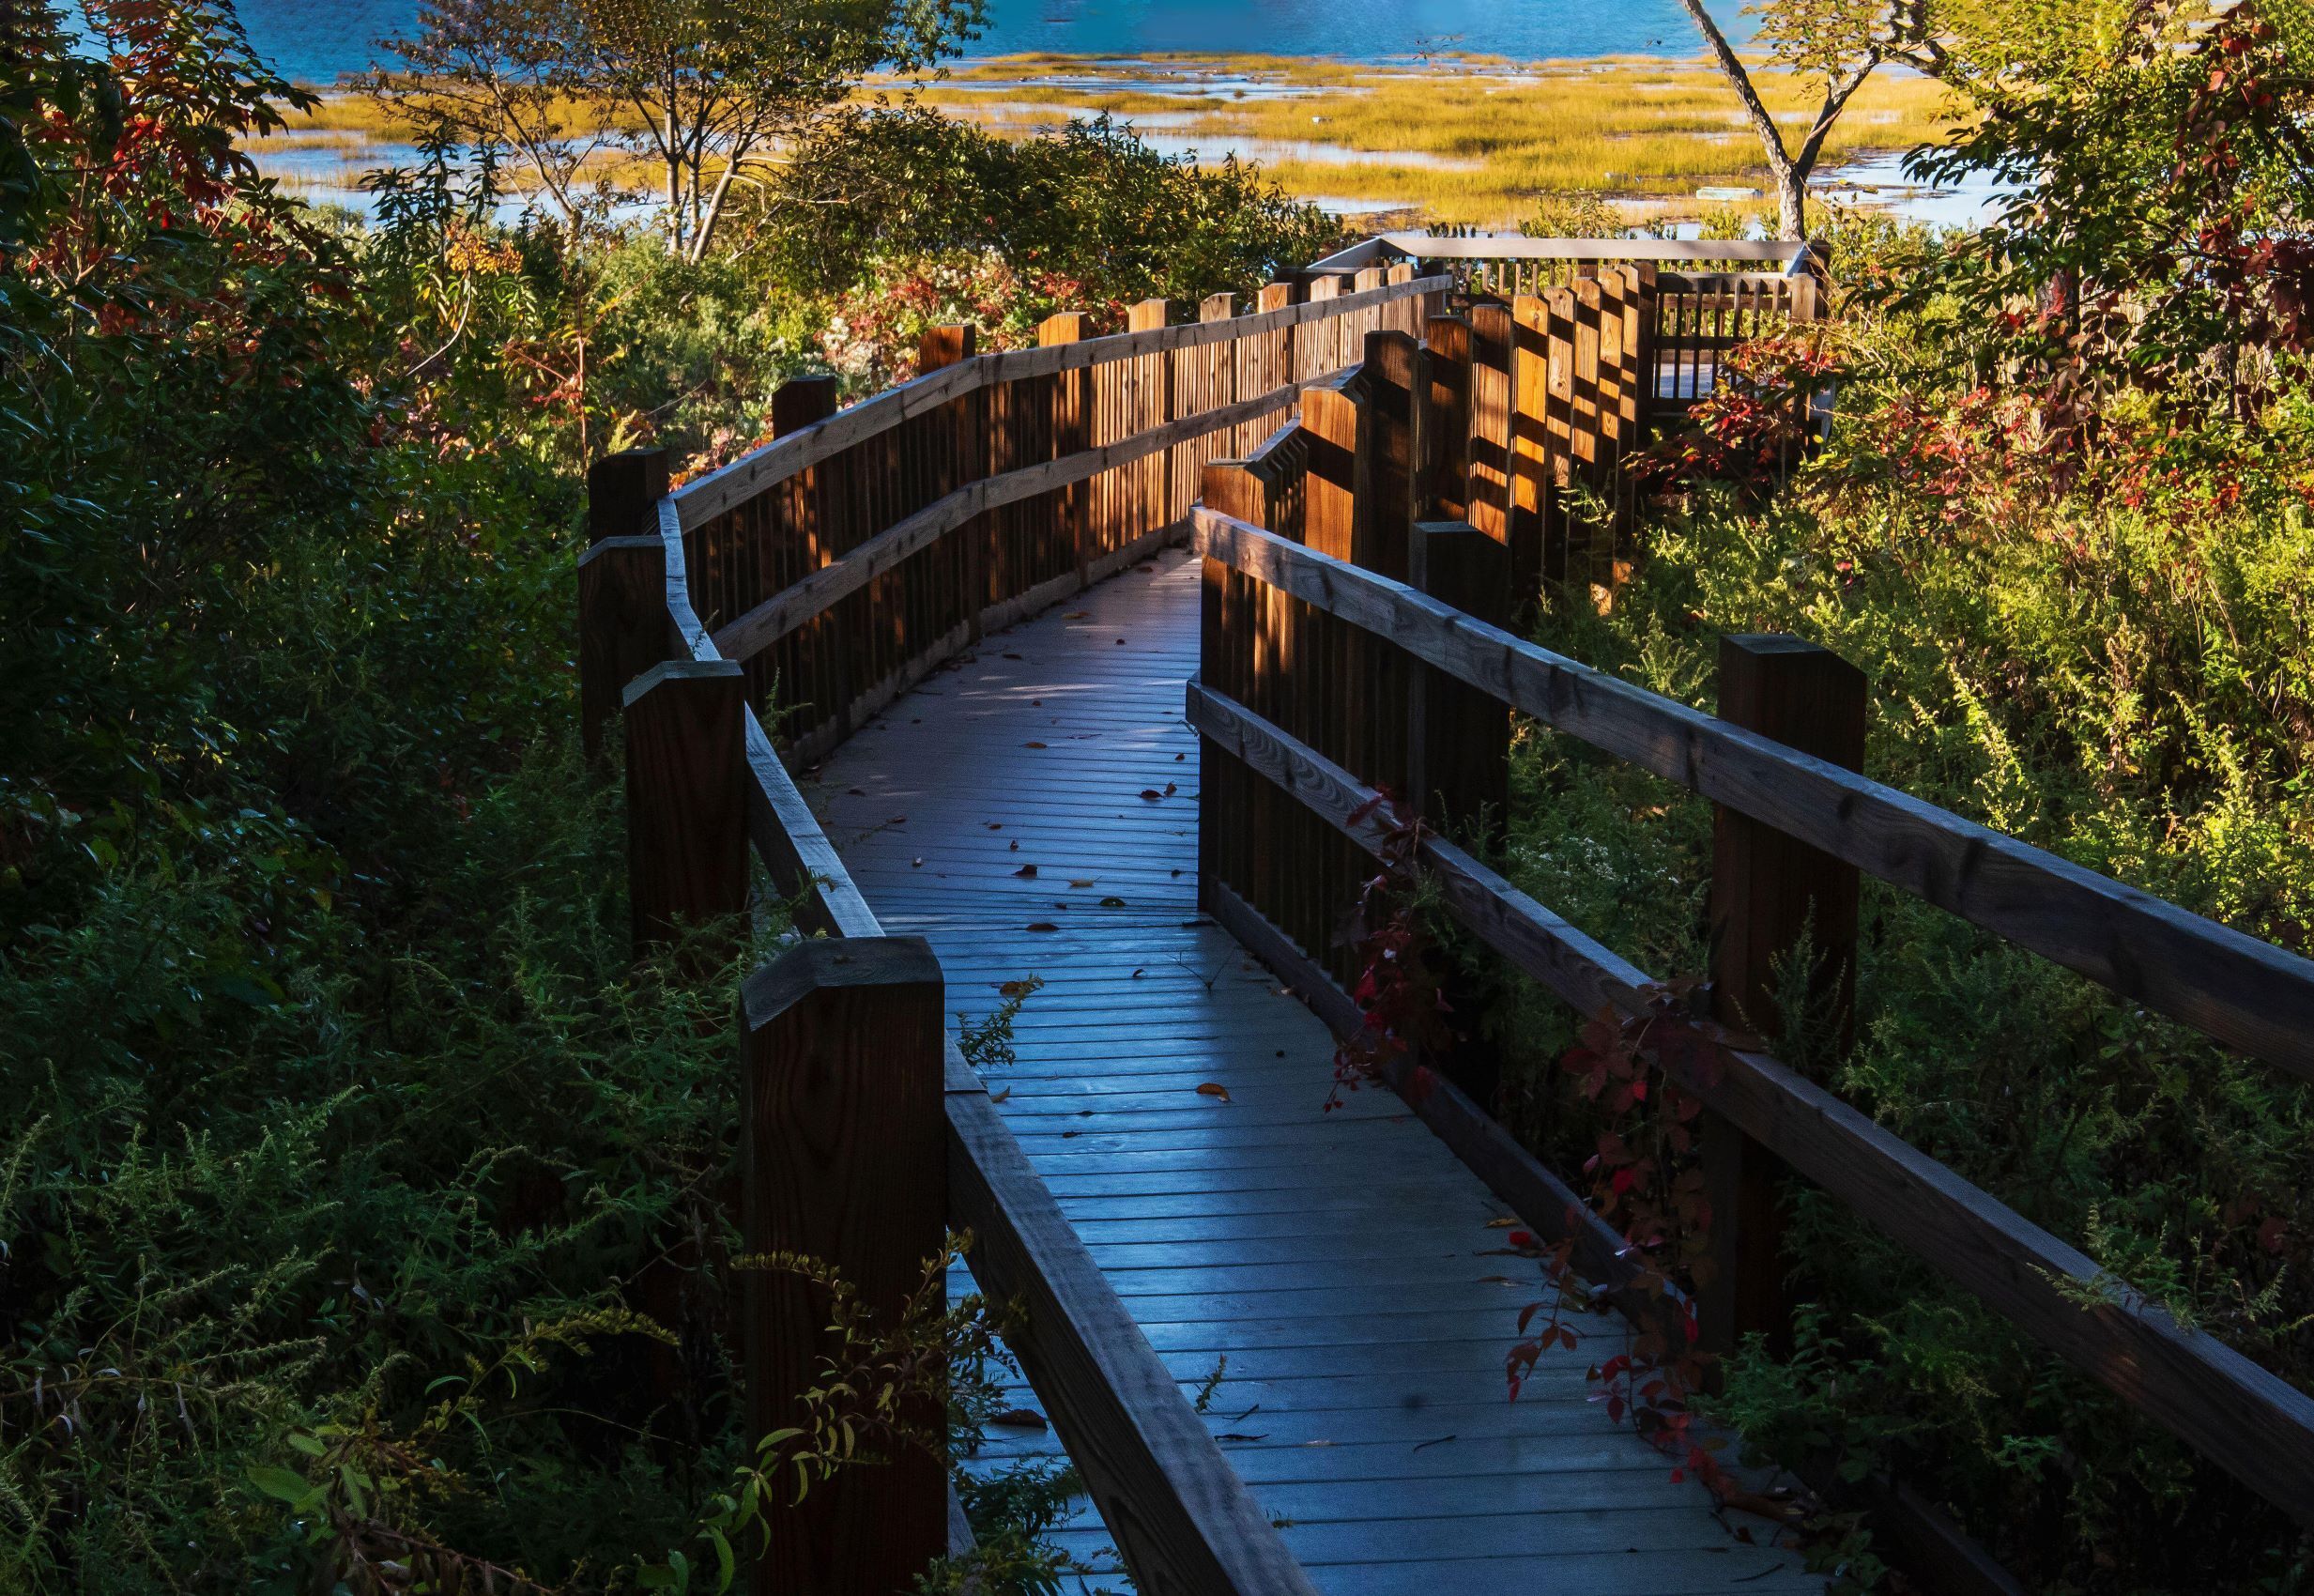 The new viewing boardwalk by Jamaica Bay Wildlife Refuge Center’s Visitor Center is a good example of accessible park planning. Photo: Johann Schumacher/Alamy Stock Photo